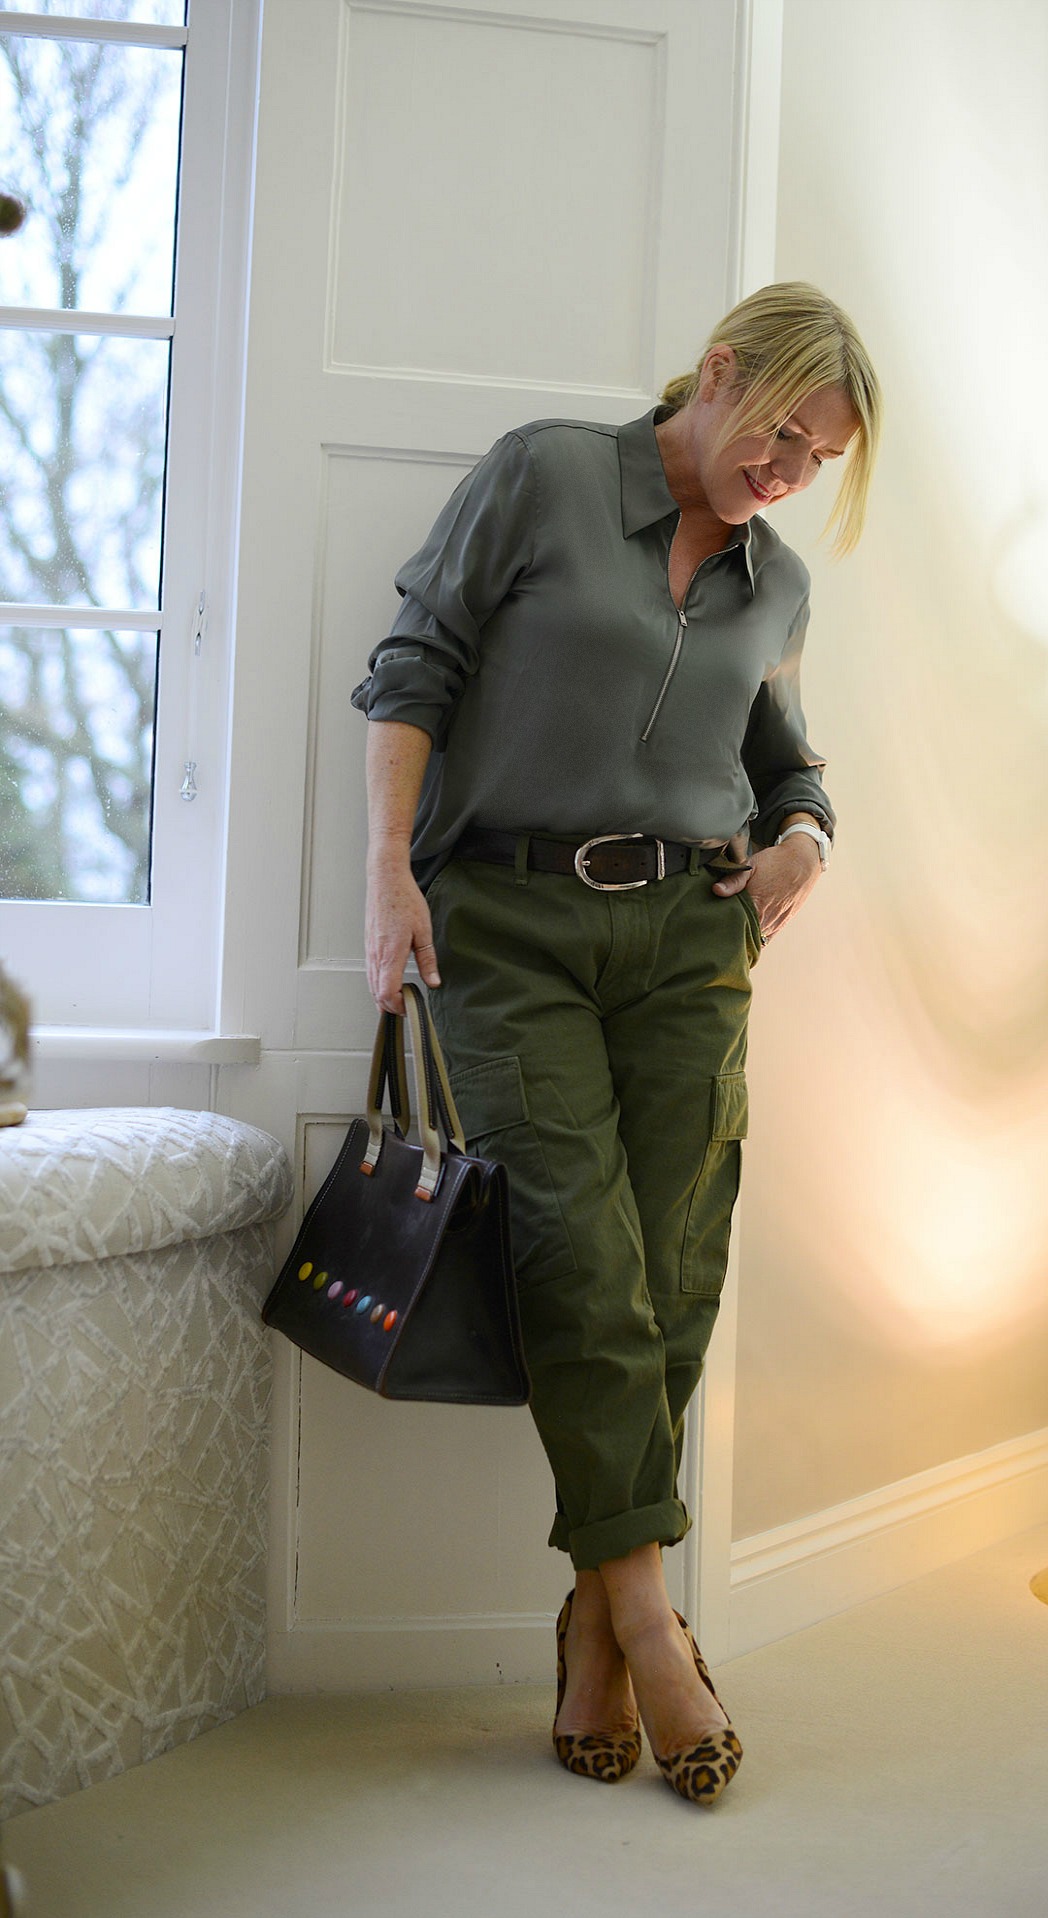 Why The Cargo Trend For Older Women Is Useful